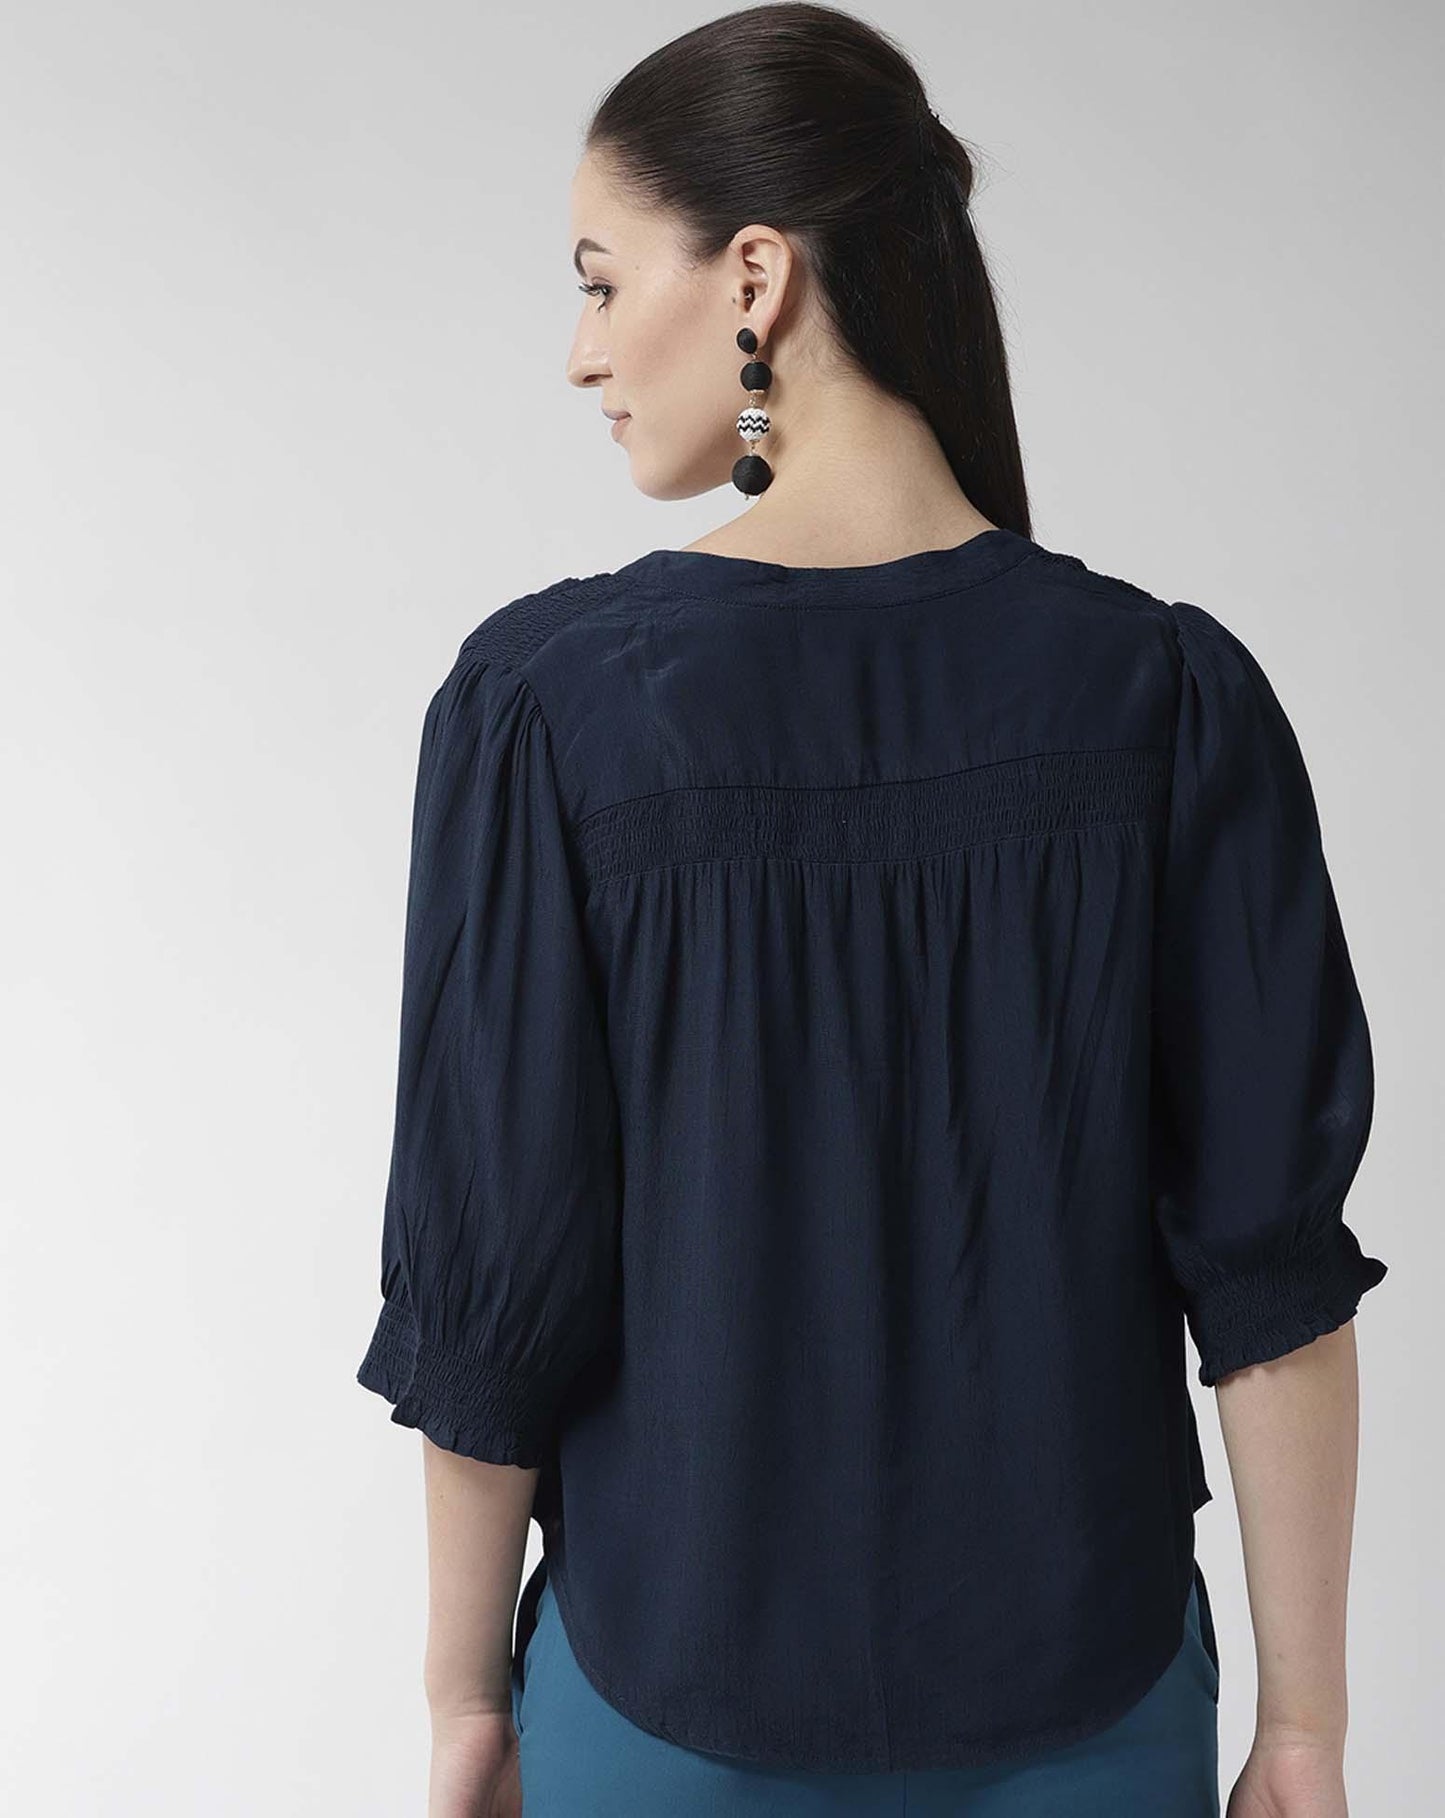 Navy Blue Solid Top